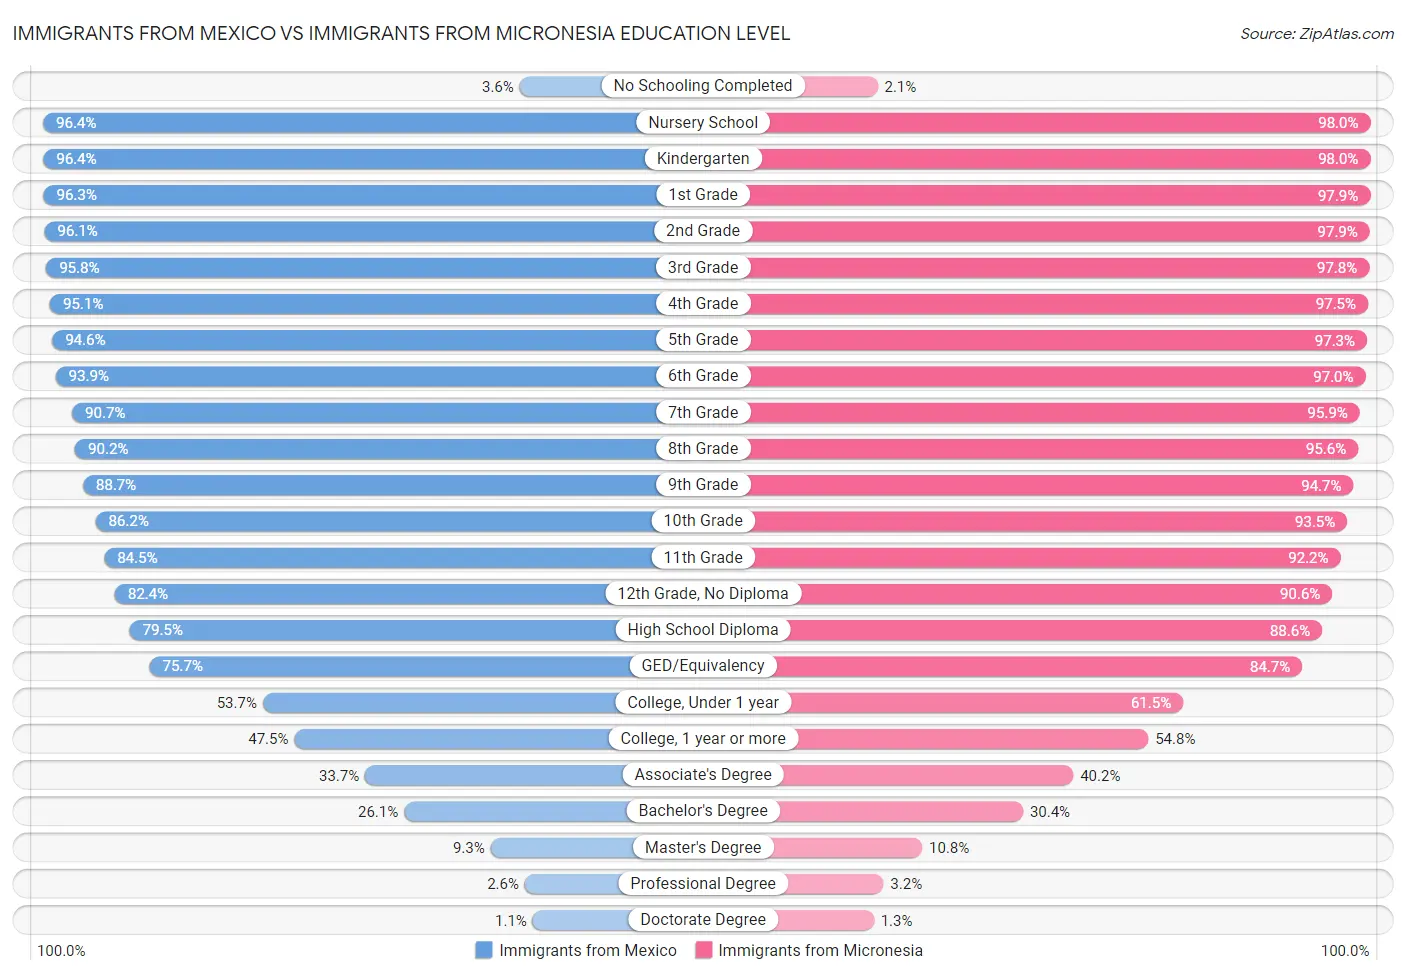 Immigrants from Mexico vs Immigrants from Micronesia Education Level